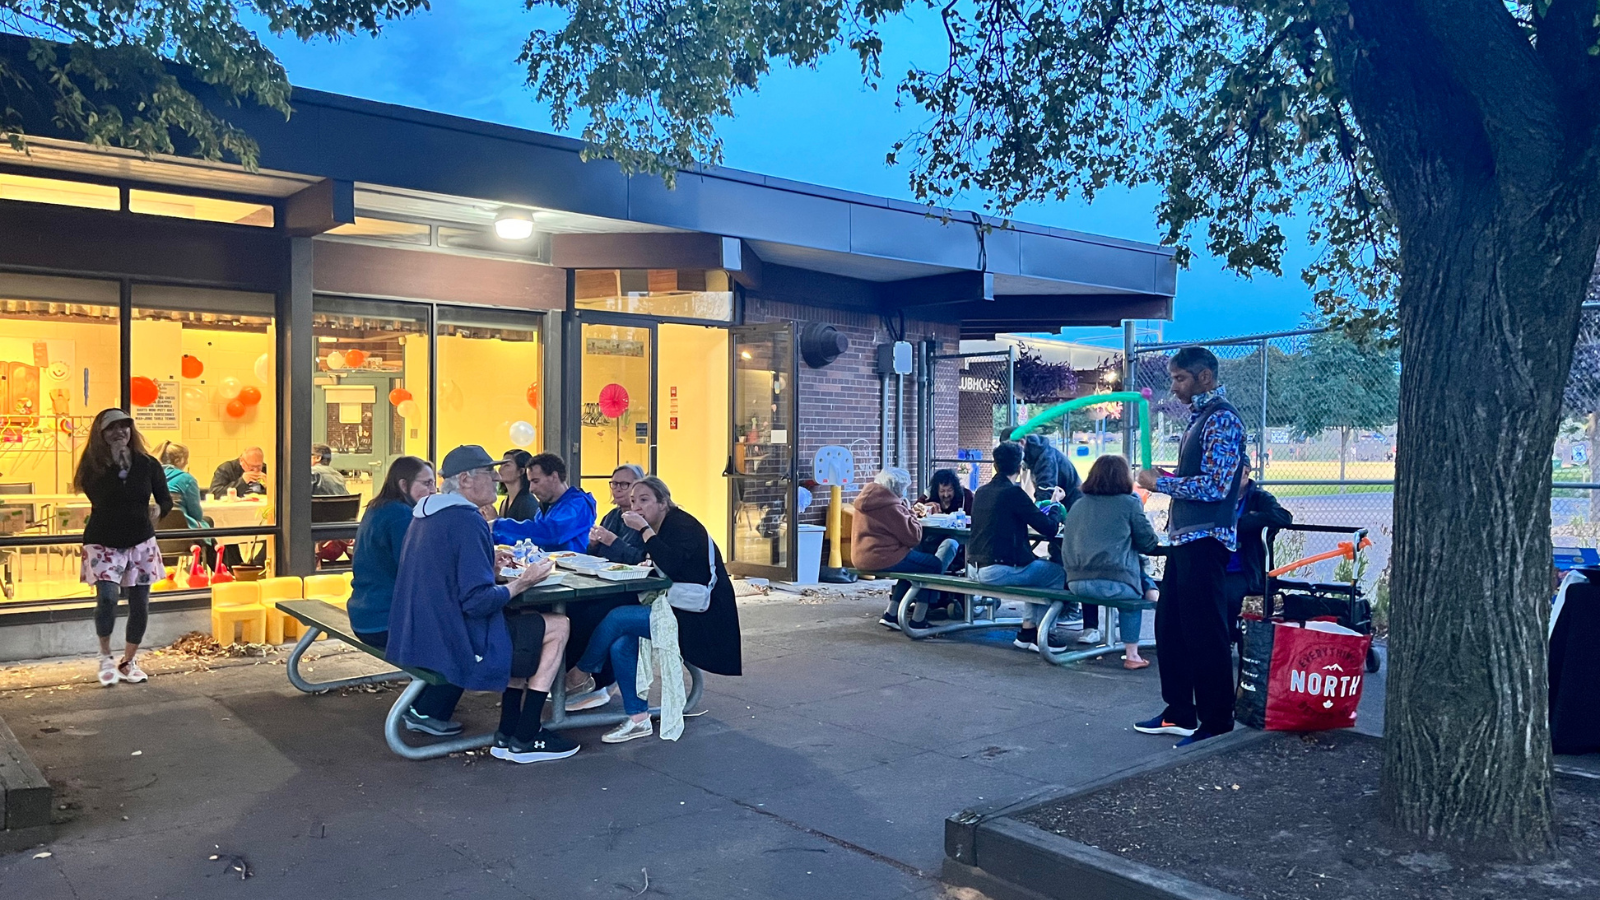 On September 27, Cedarvale House (located at 540 Cedarvale Ave.), in collaboration with WoodGreen’s Access and Inclusion Advisory Committee (AIAC), hosted a community BBQ at Stan Wadlow Clubhouse.